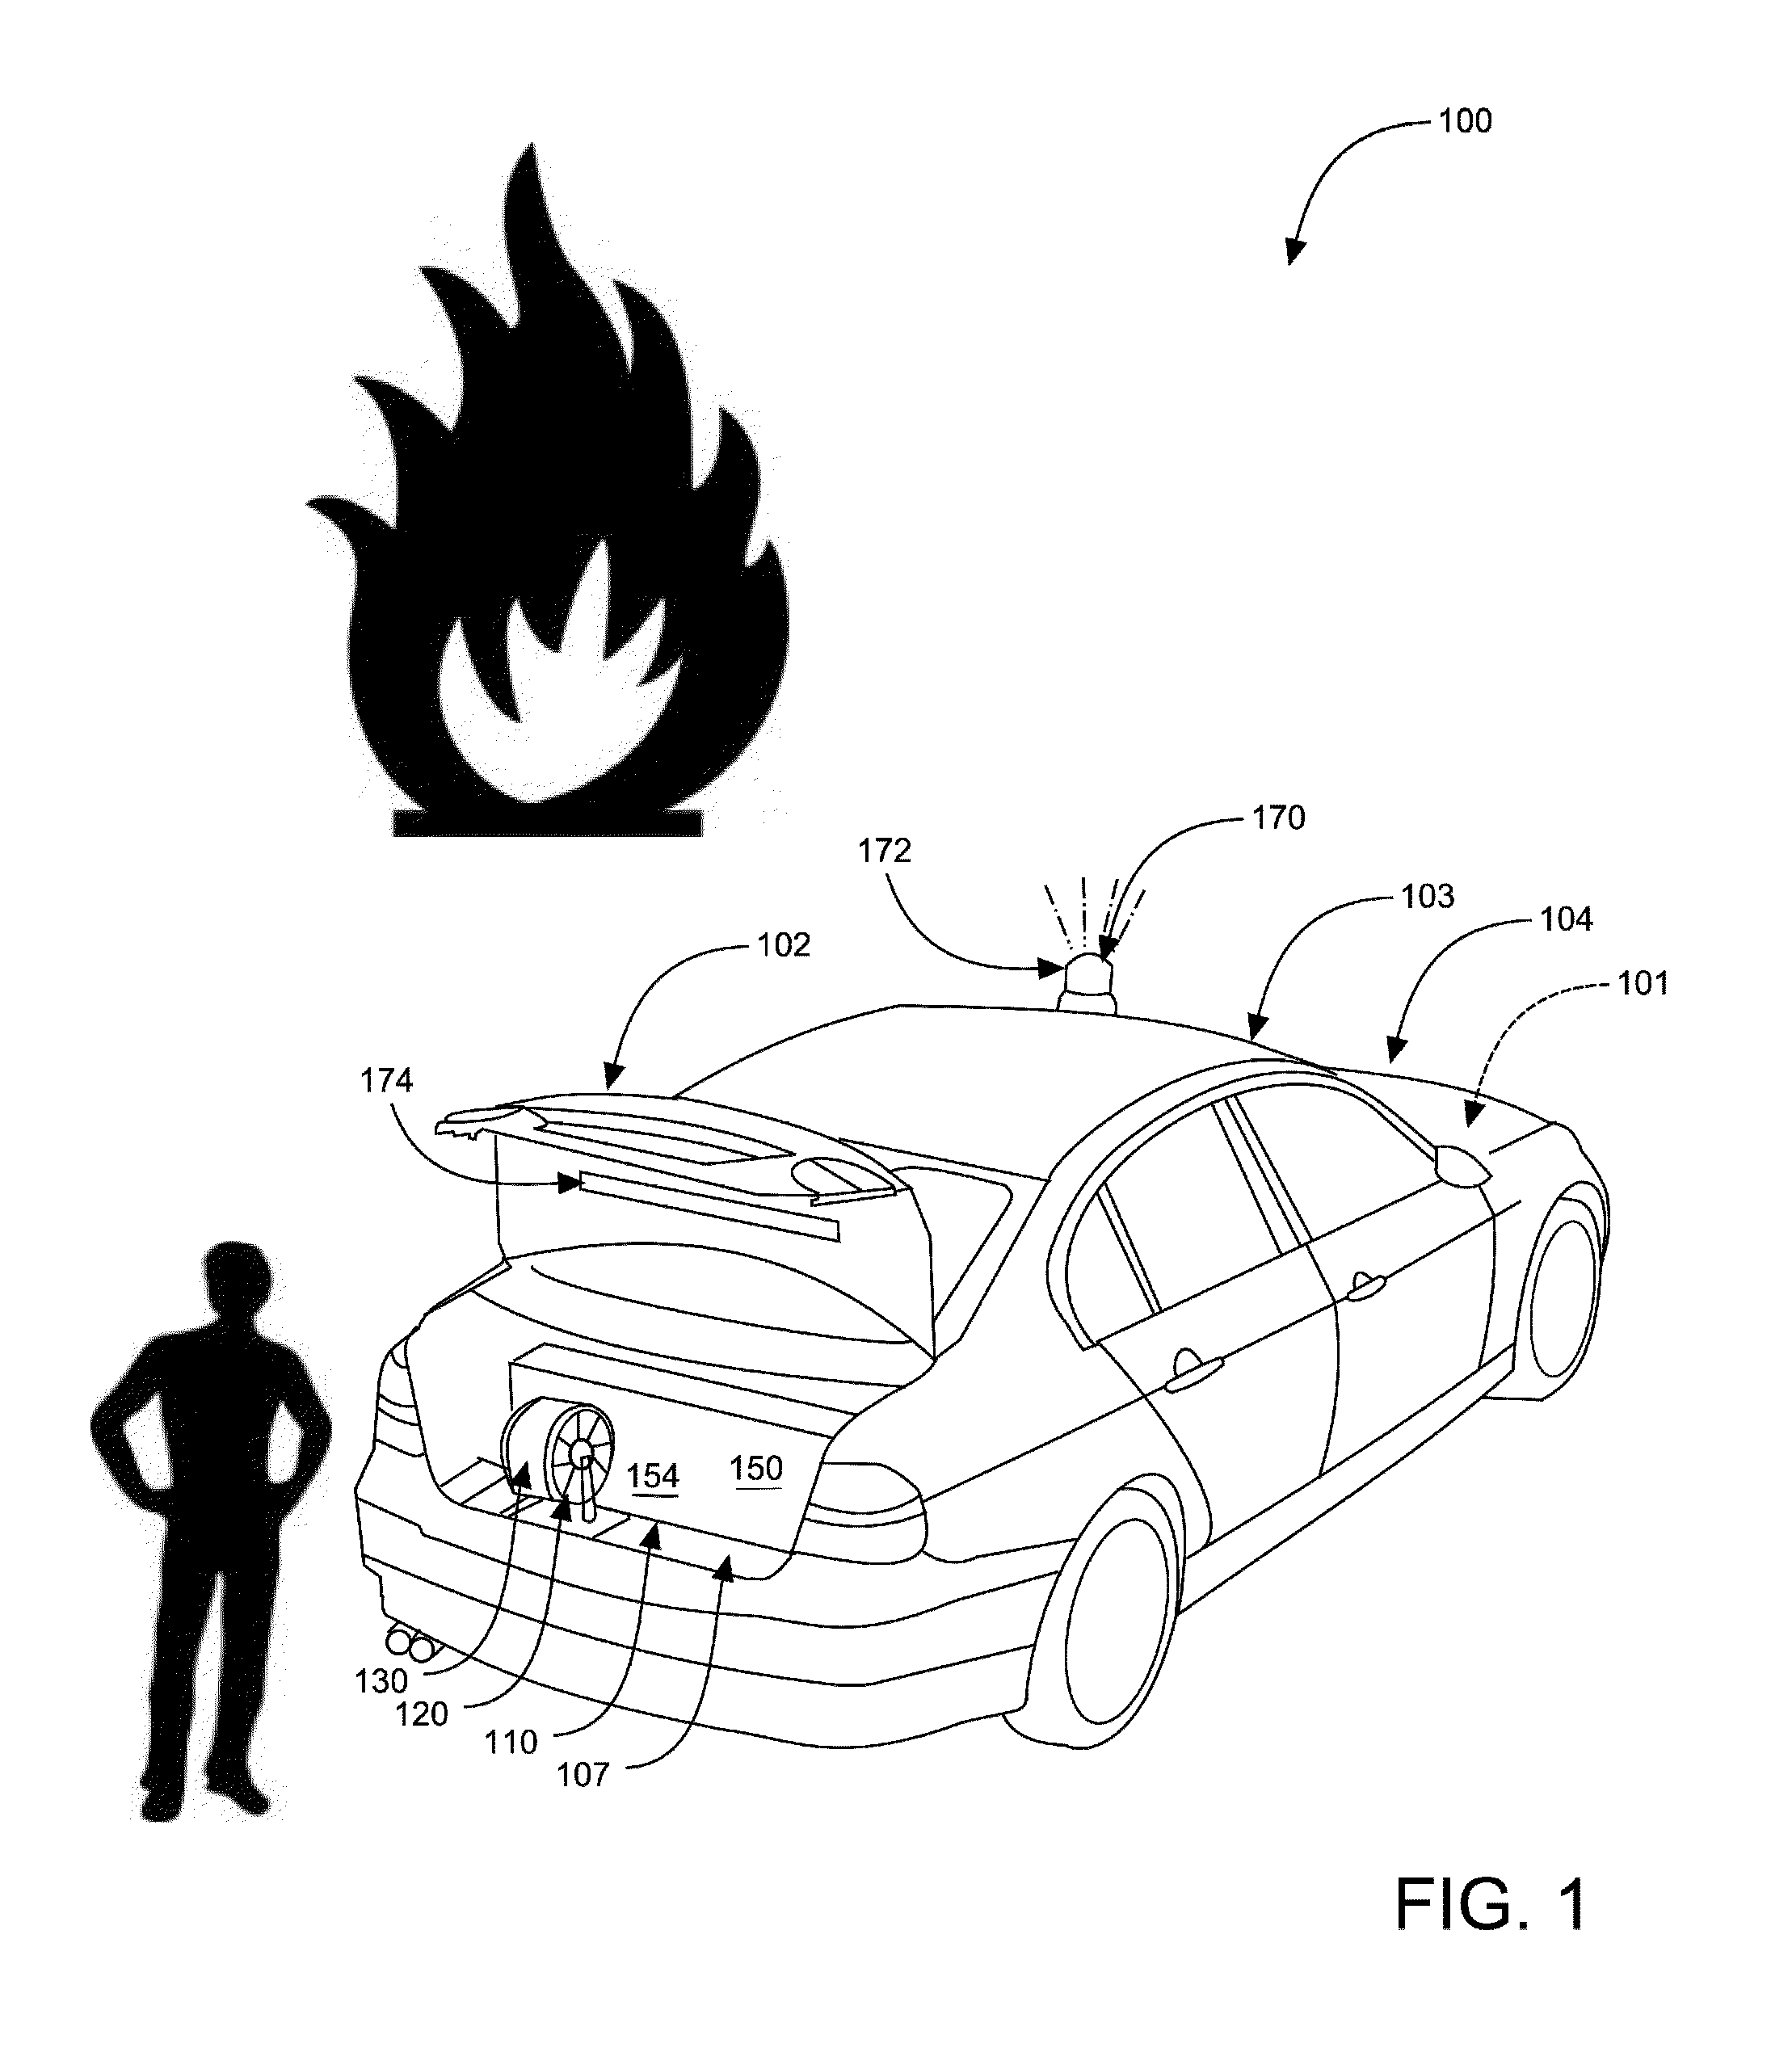 Self-contained fire-fighting system